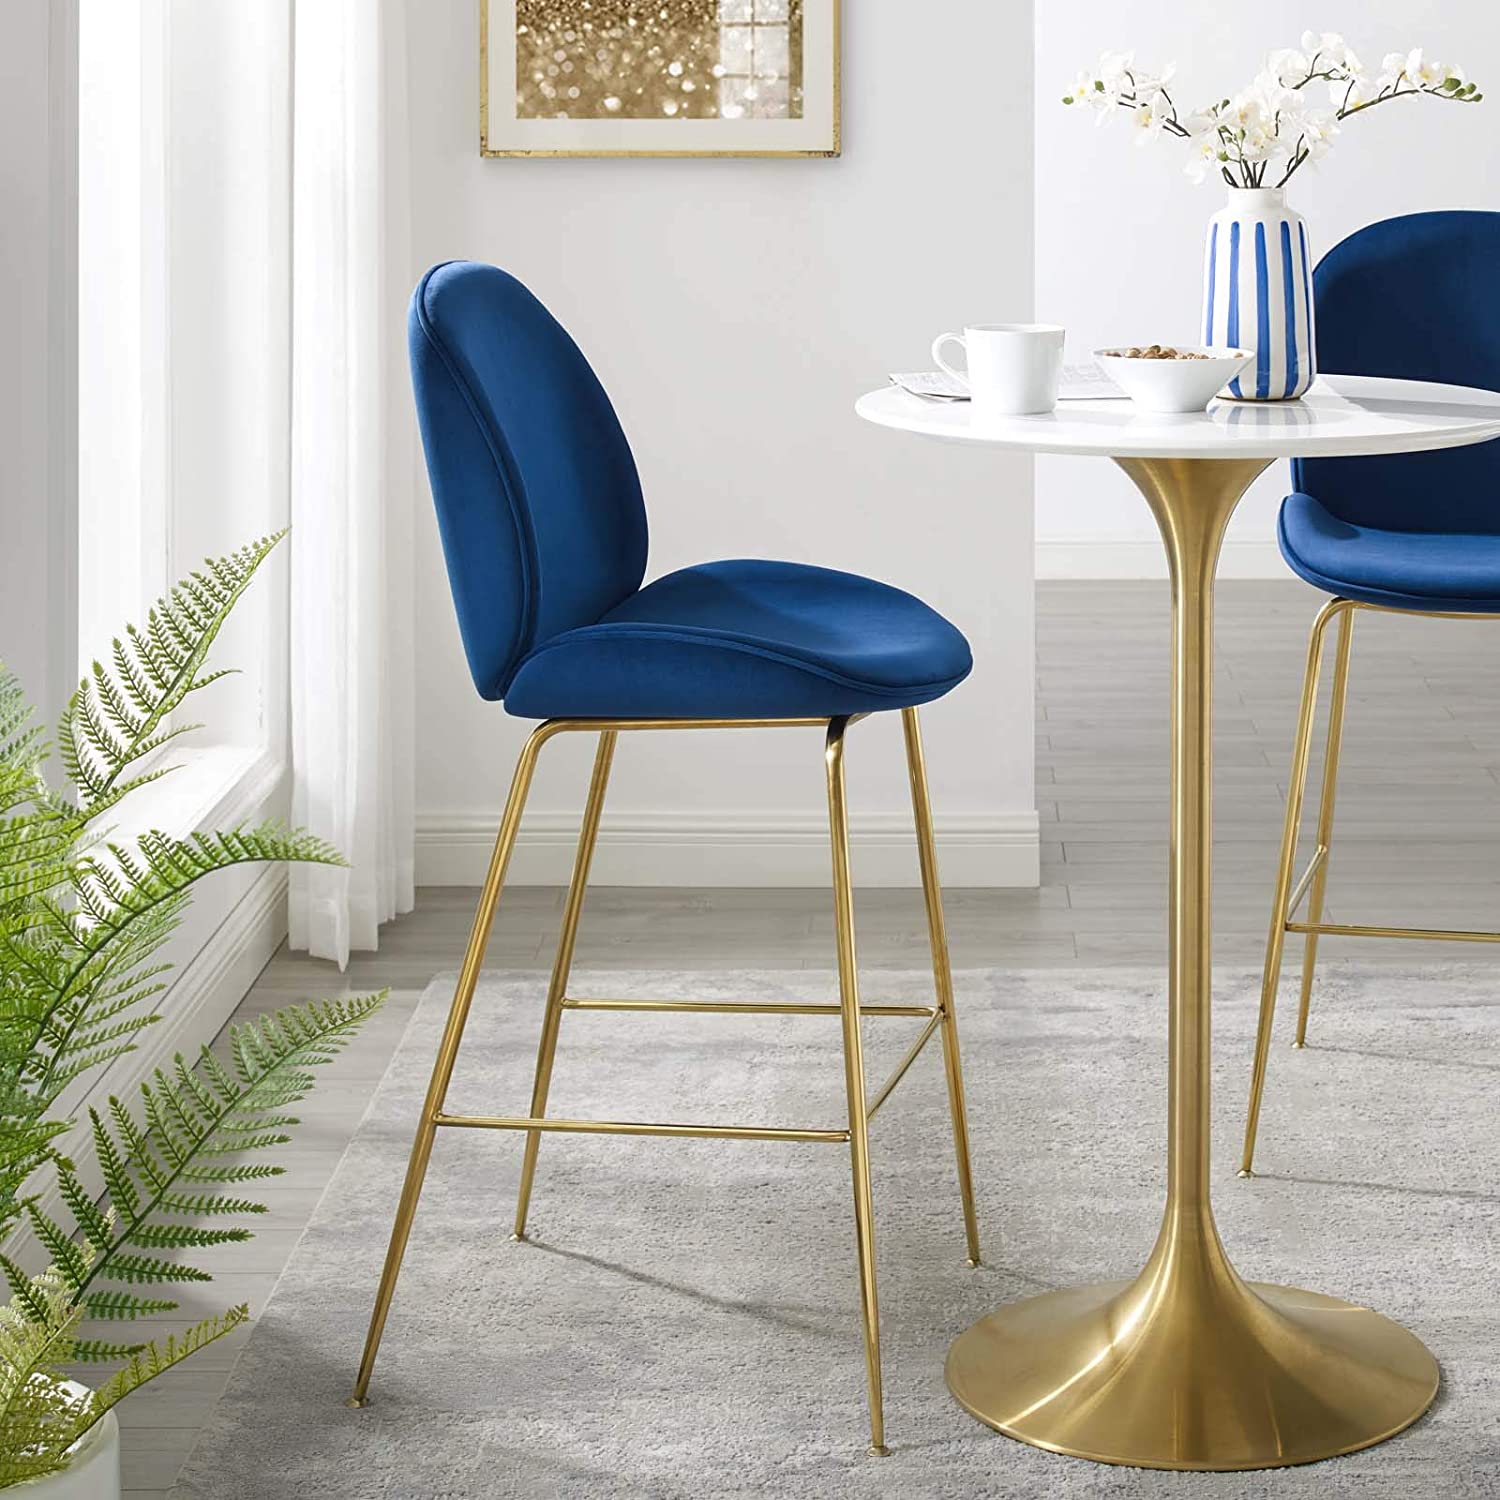 sapphire blue upholstered bar stools with gold base and footrest affordable beetle stool reproduction cheap designer furniture for sale on amazon contemporary barstools